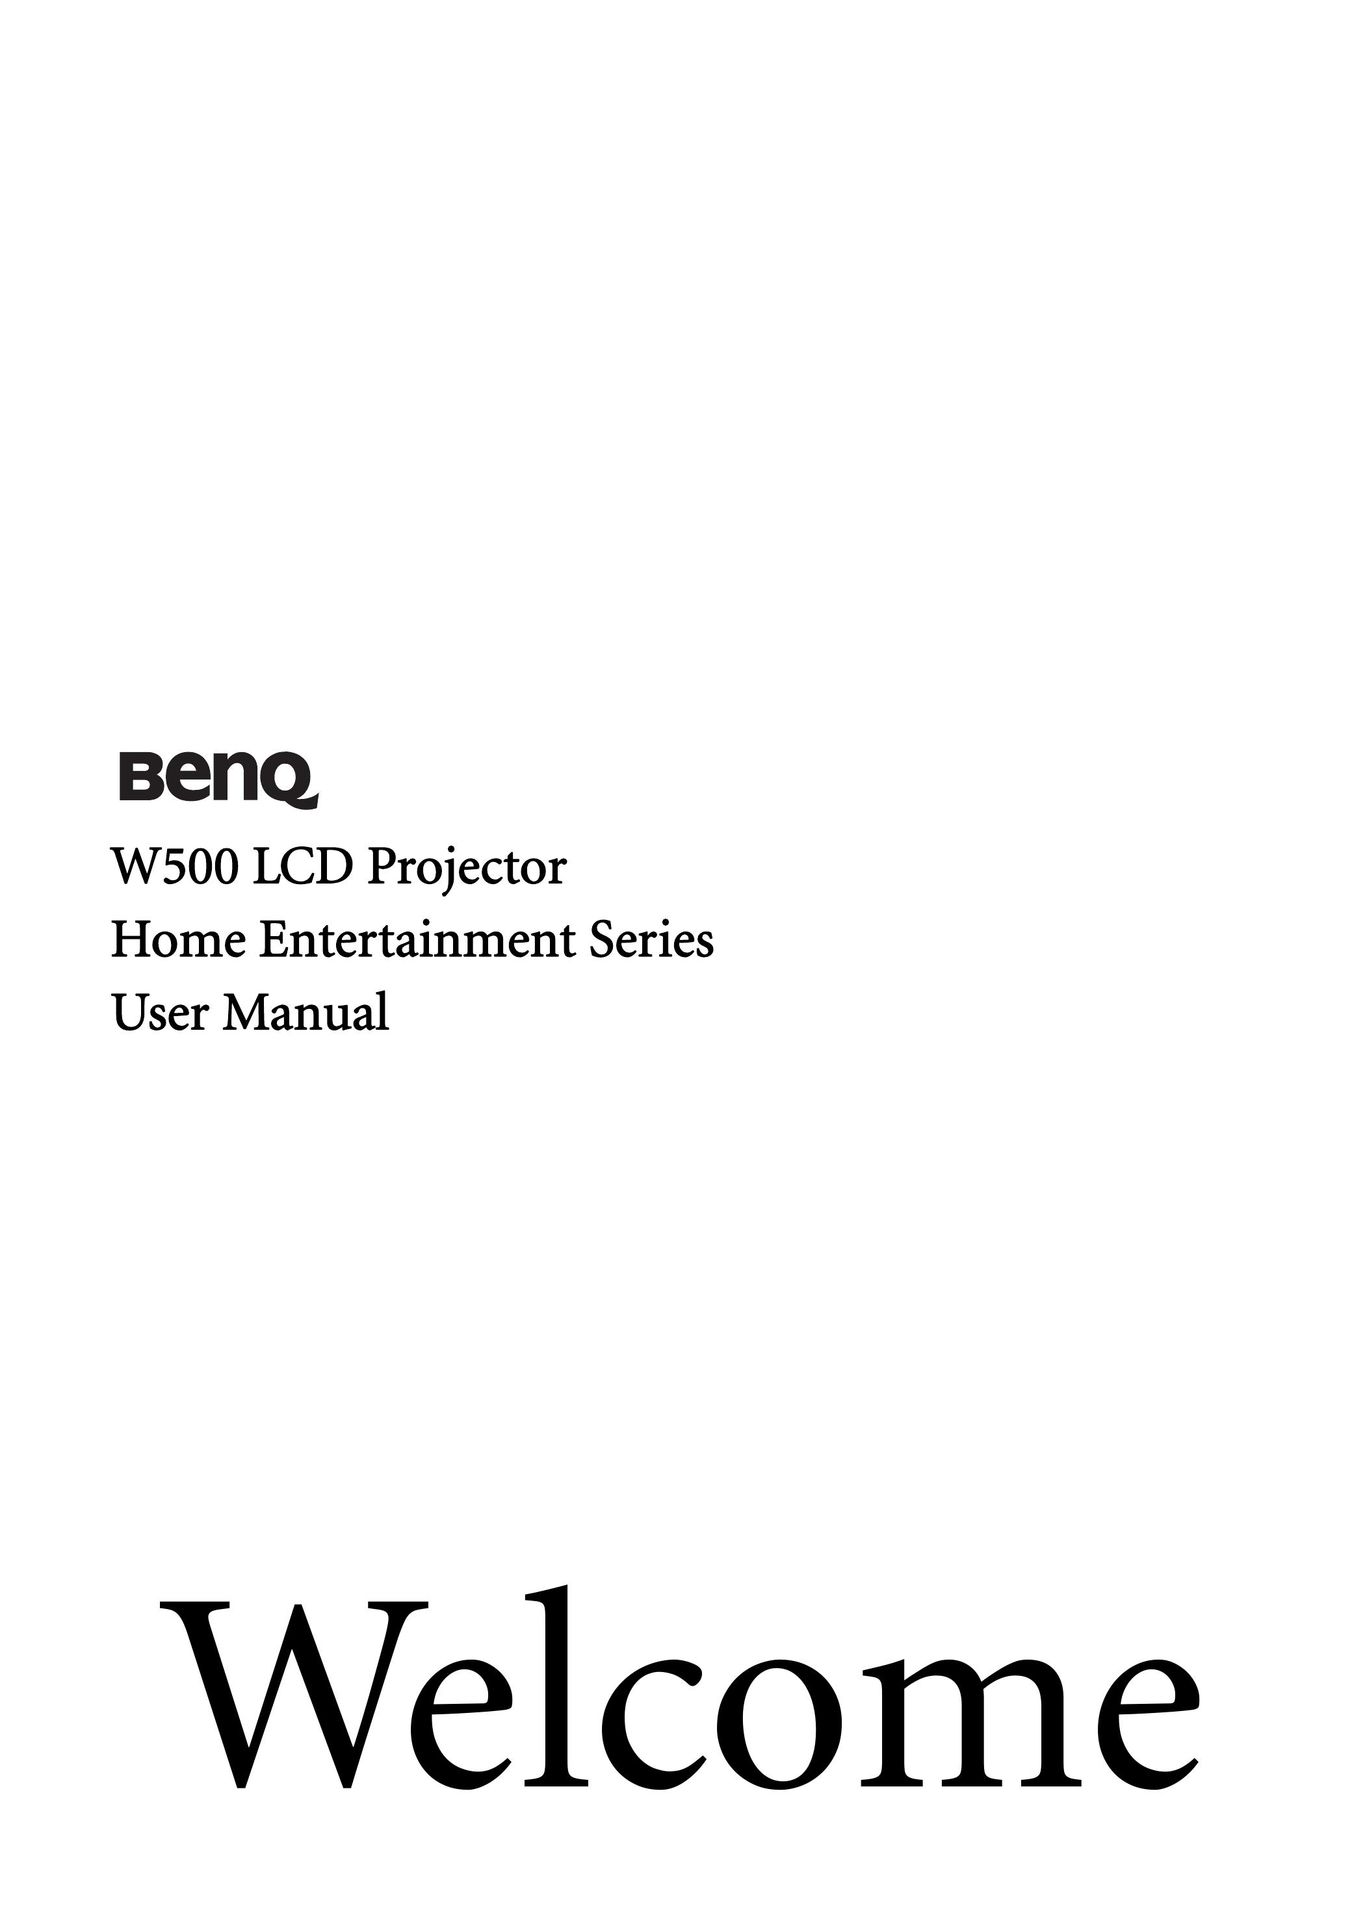 BenQ W500 Projection Television User Manual